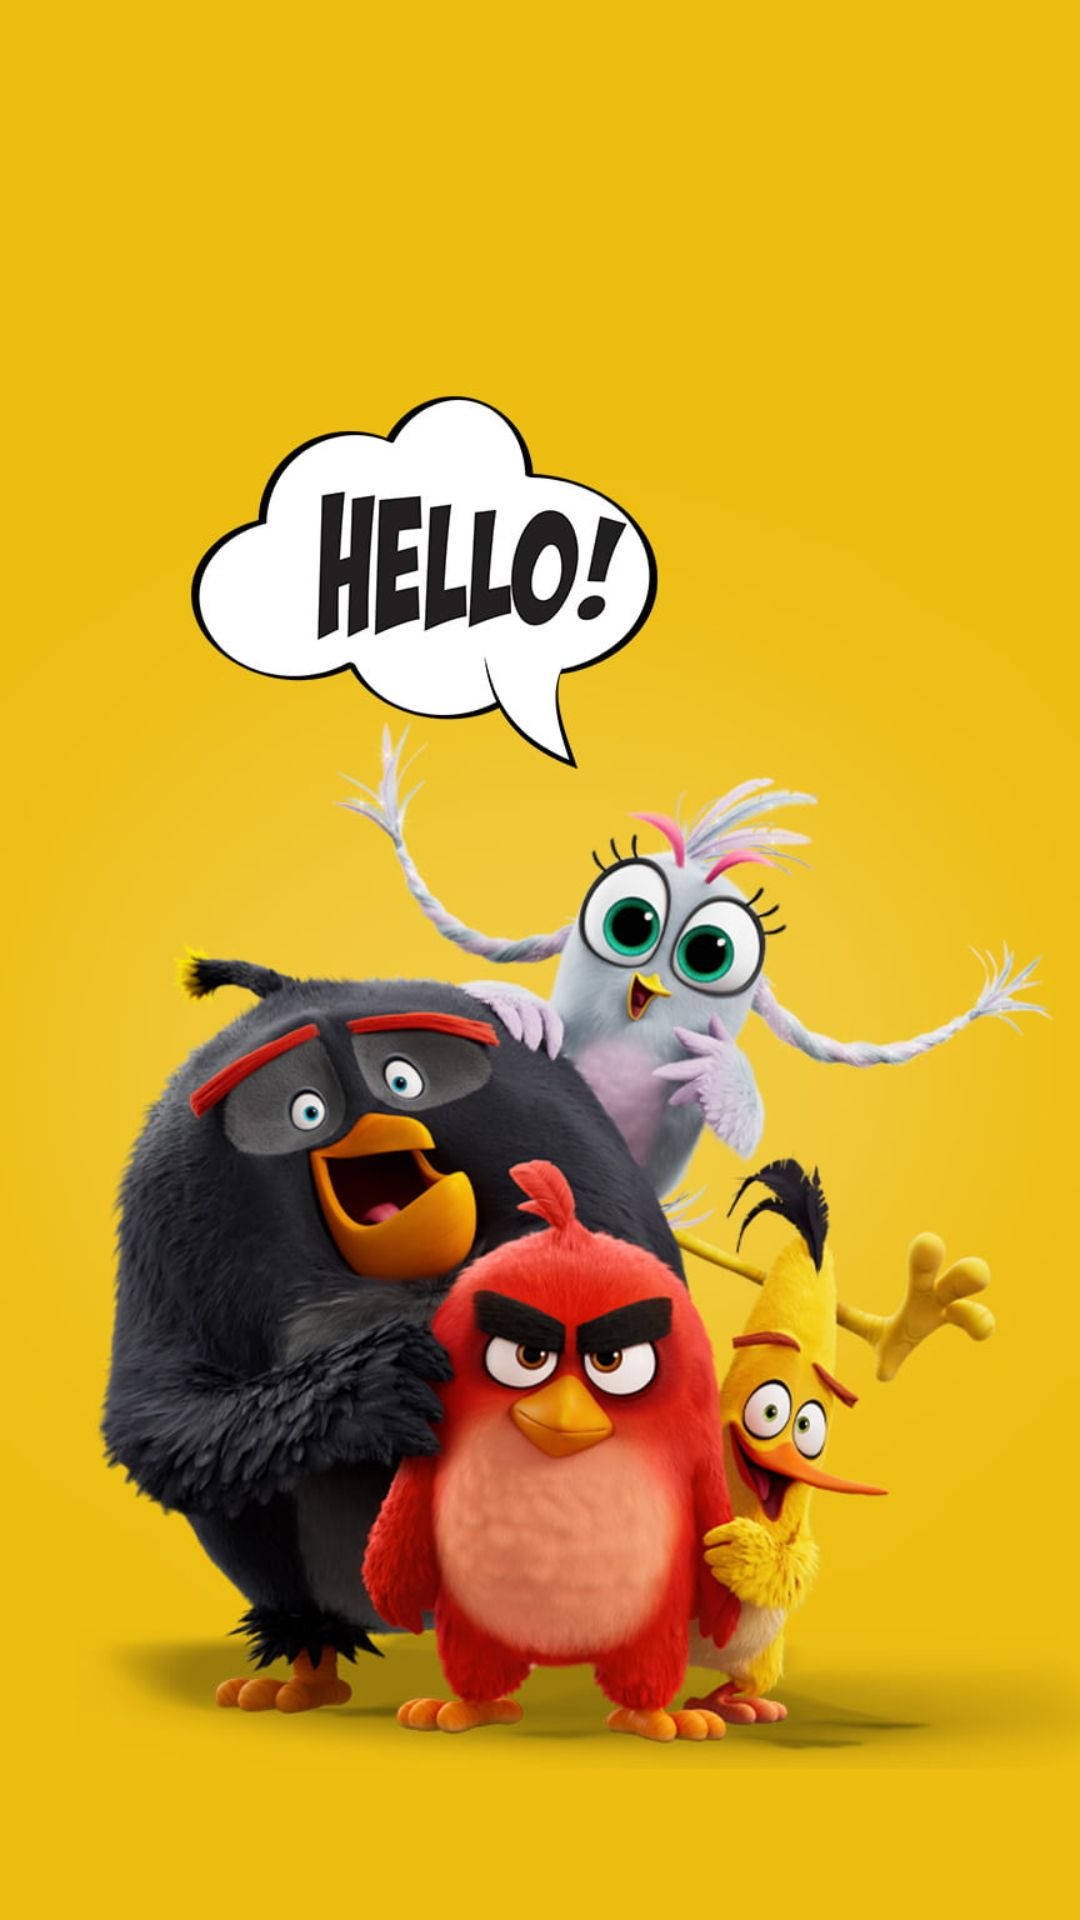 Free The Angry Birds Movie Wallpaper Downloads, The Angry Birds Movie Wallpaper for FREE